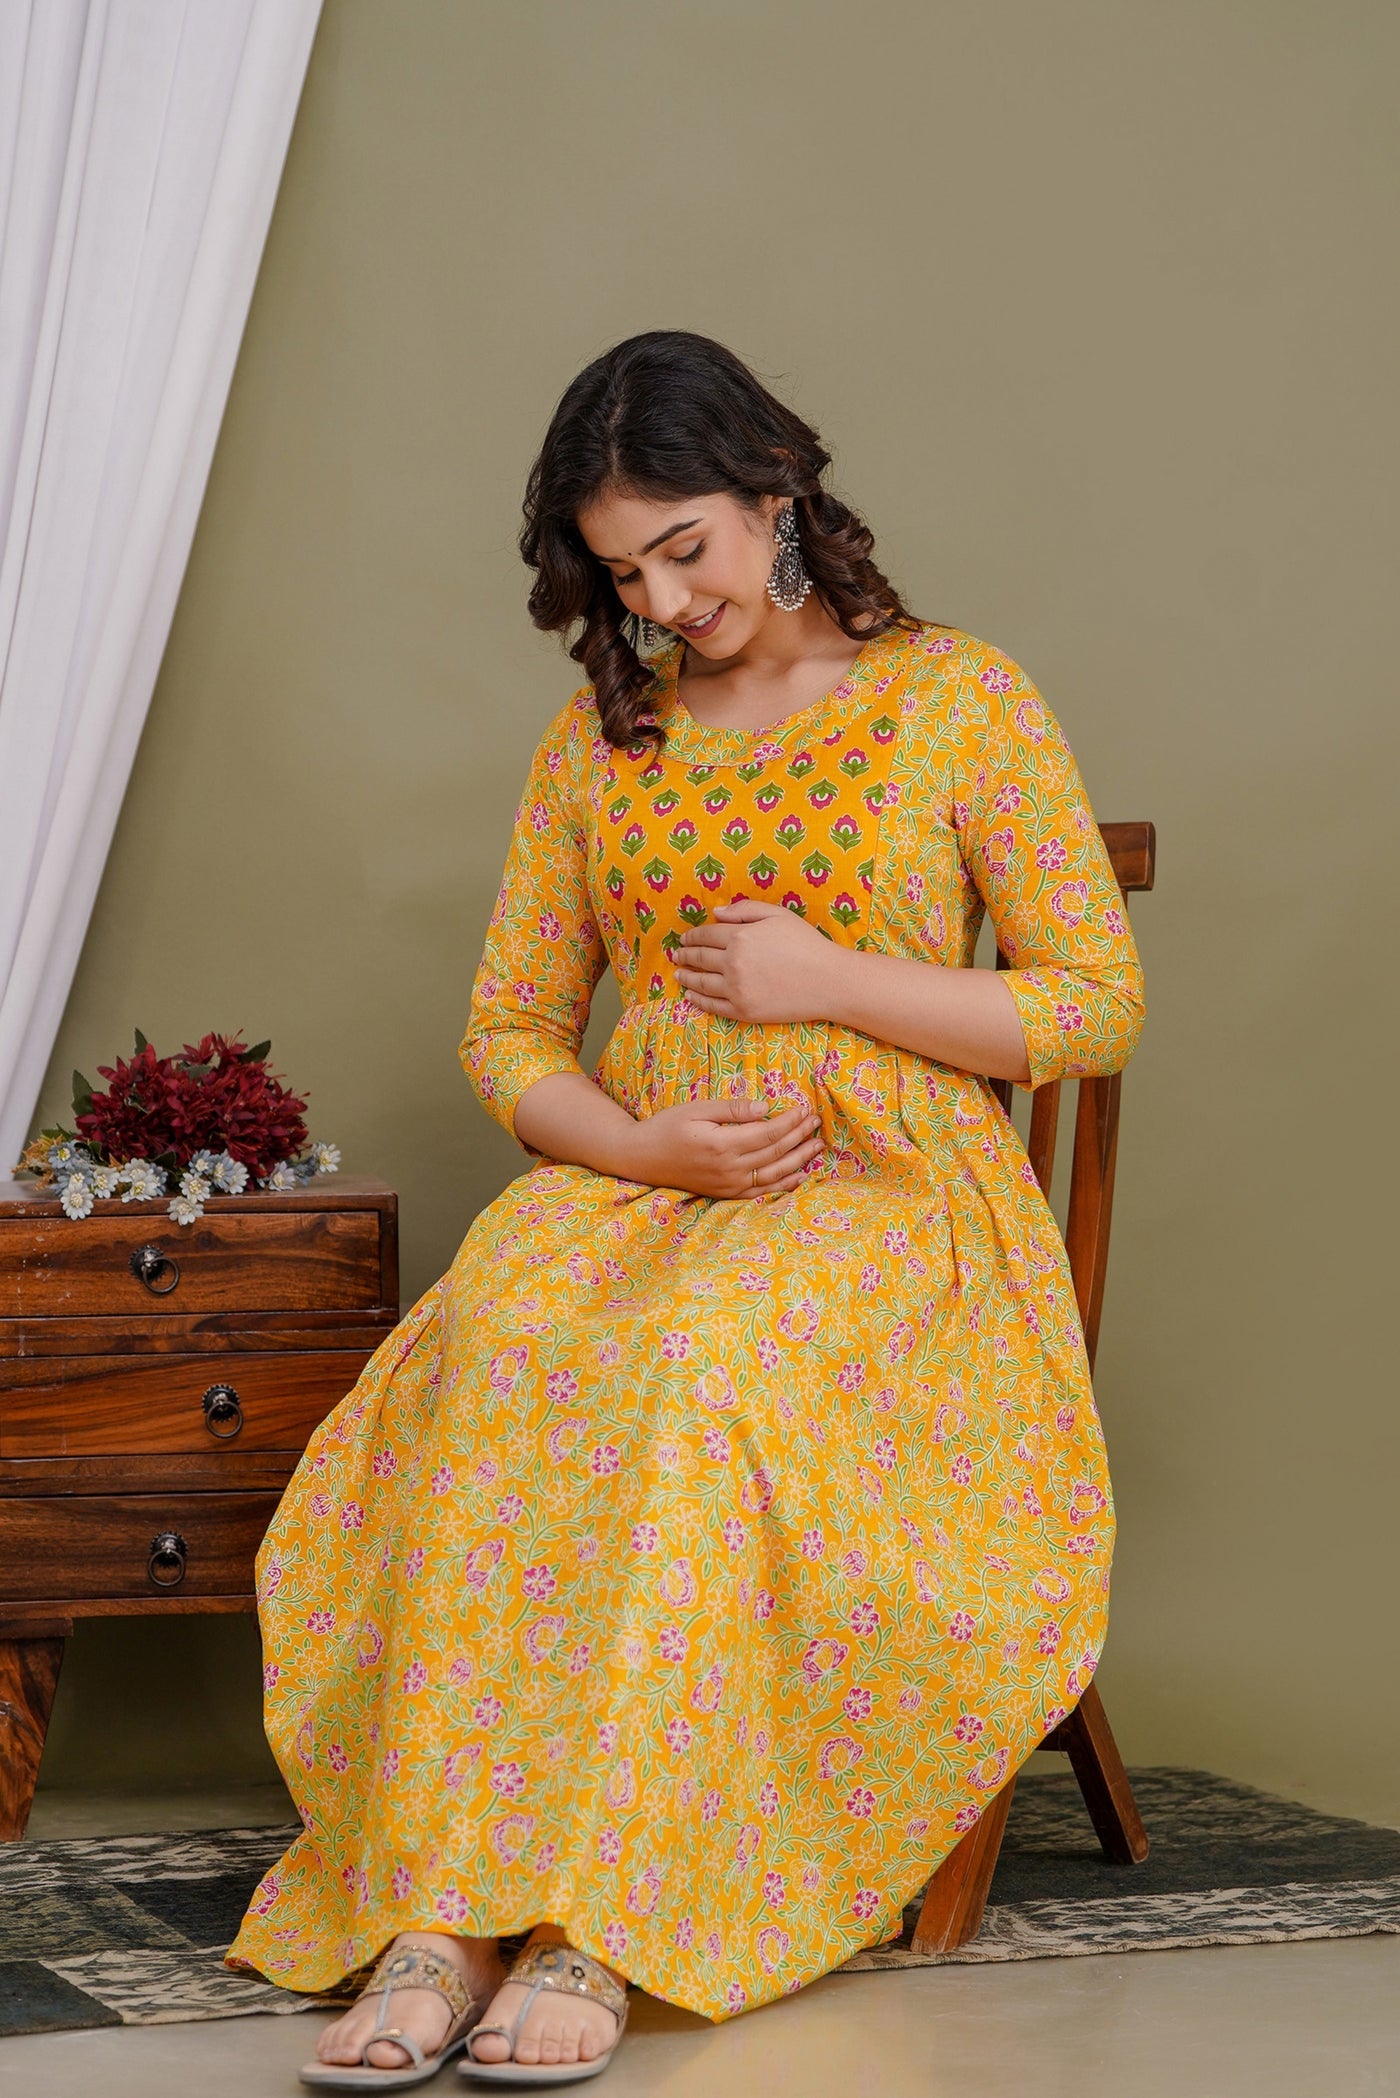 Carrot Orange Floral Print Maternity Nursing Gown with Feeding Zip